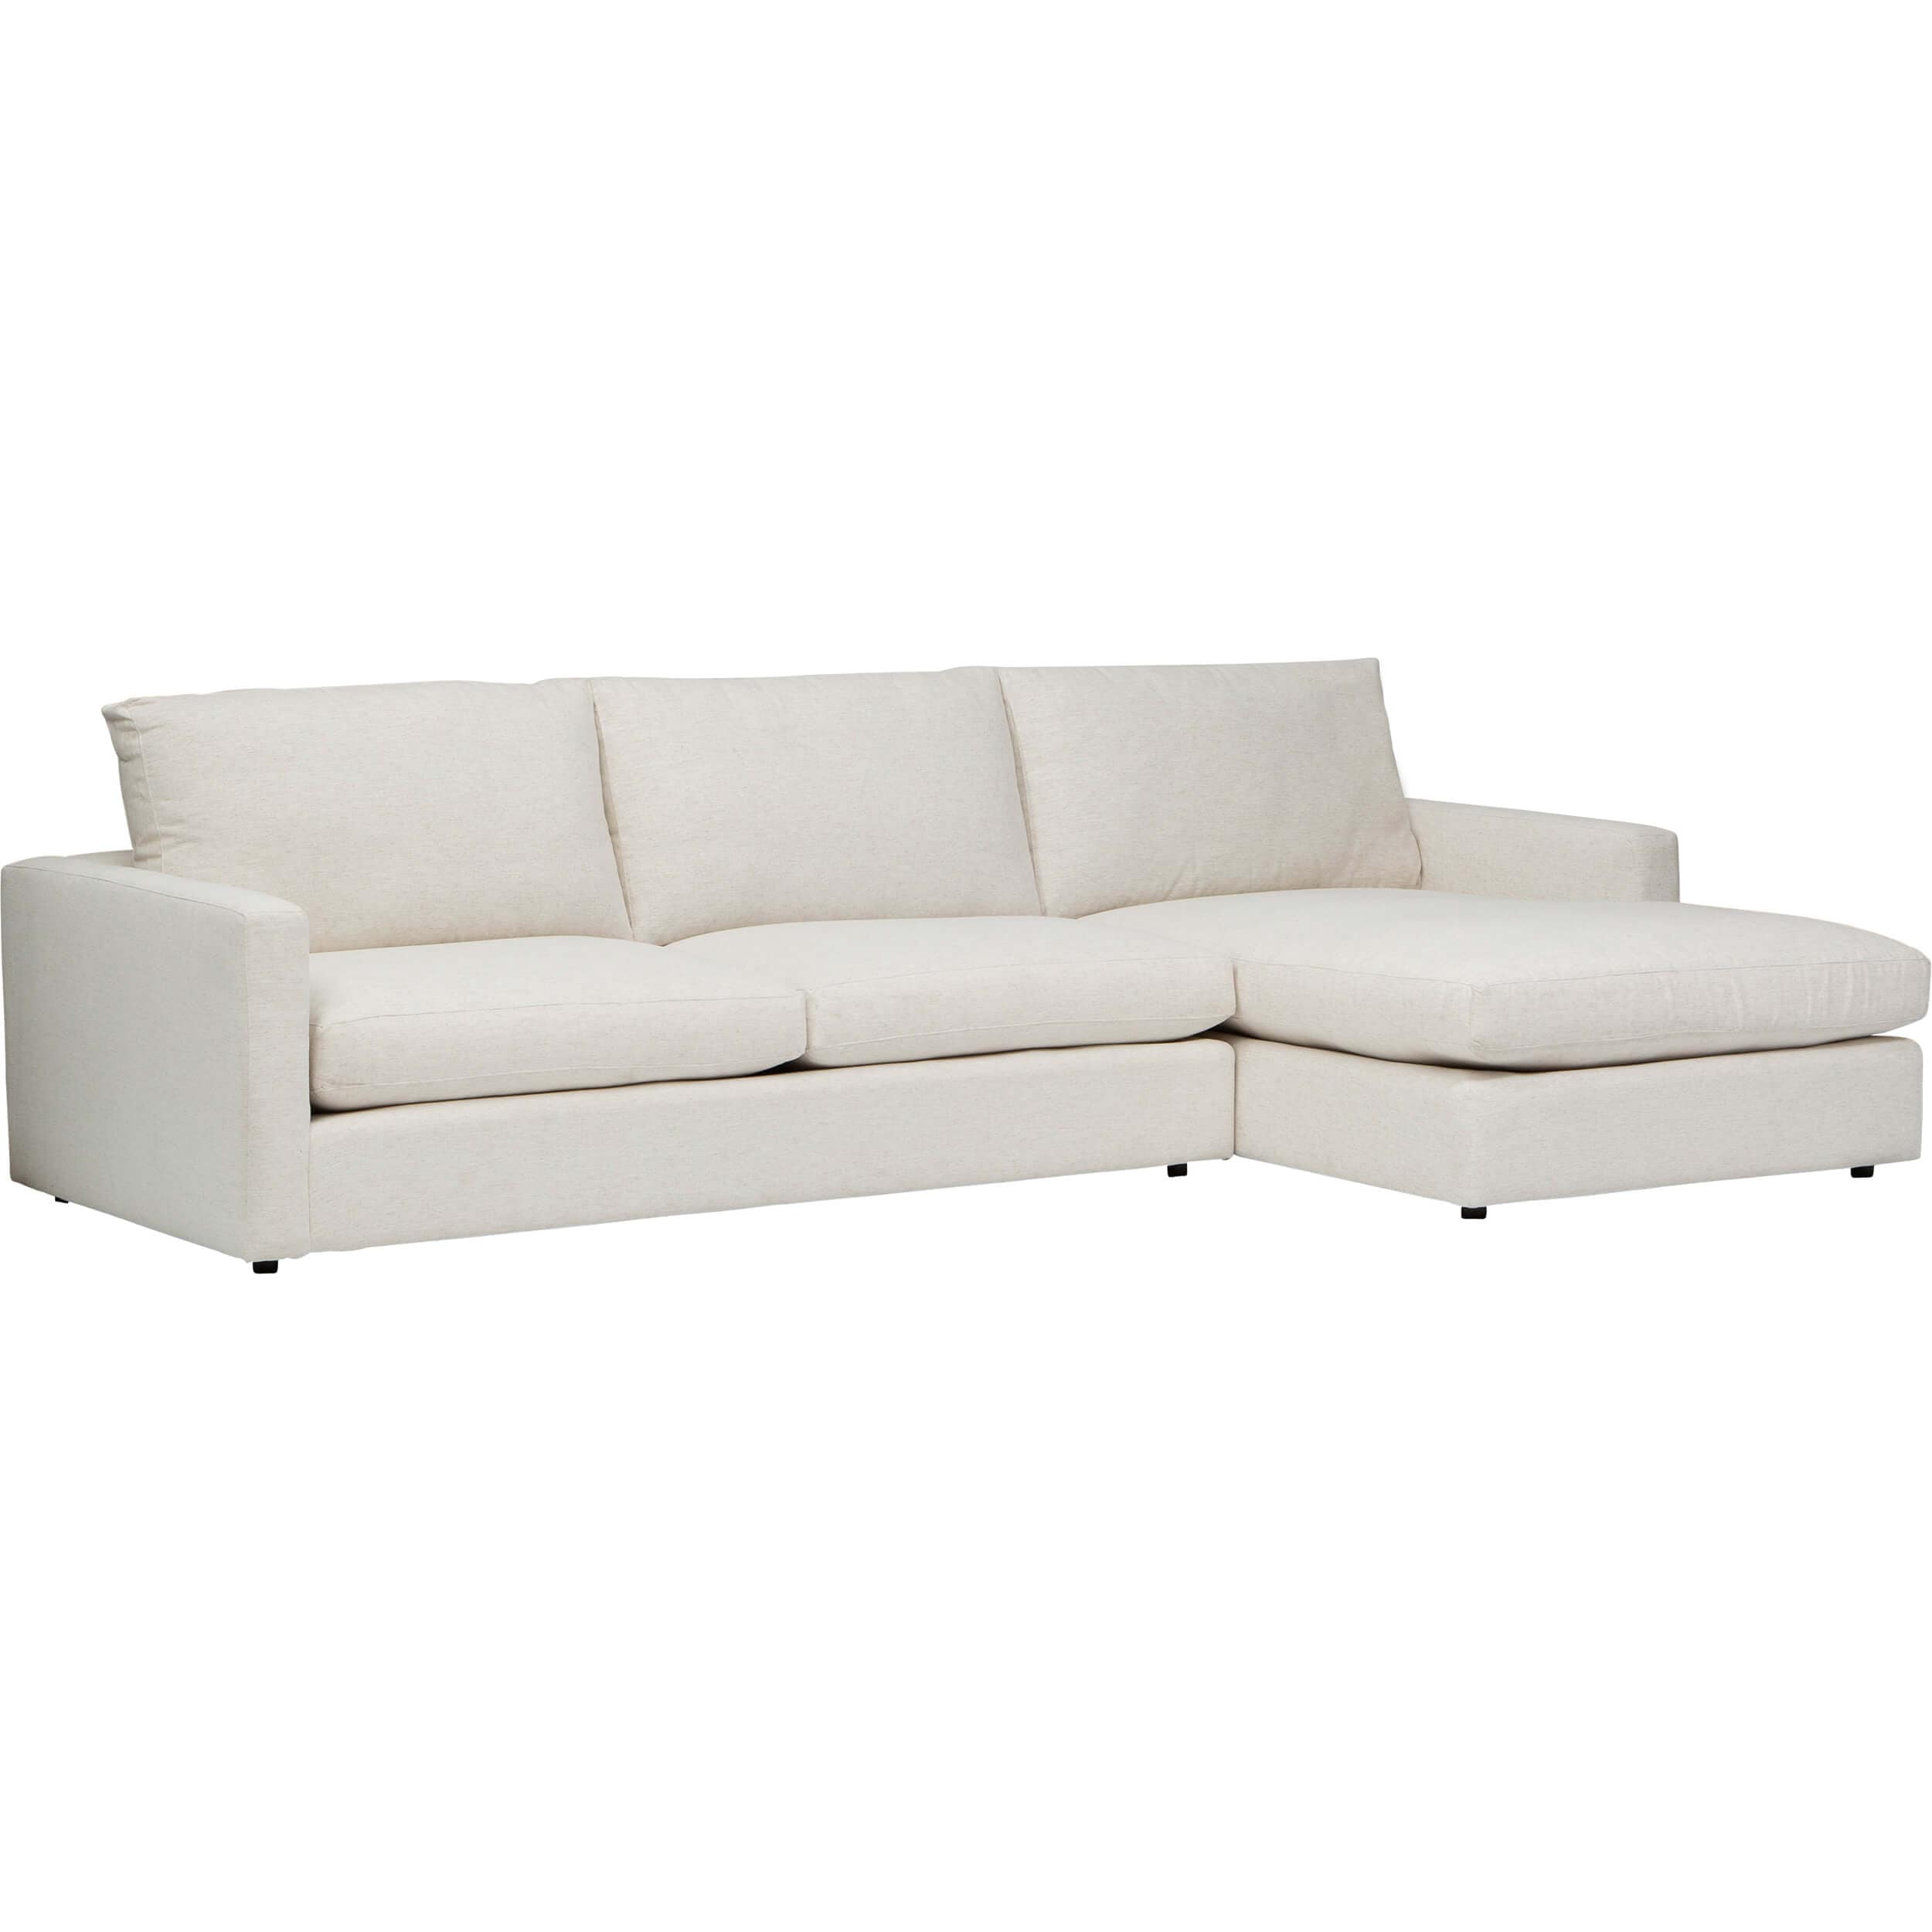 Image of Miller Sectional, Nomad Snow